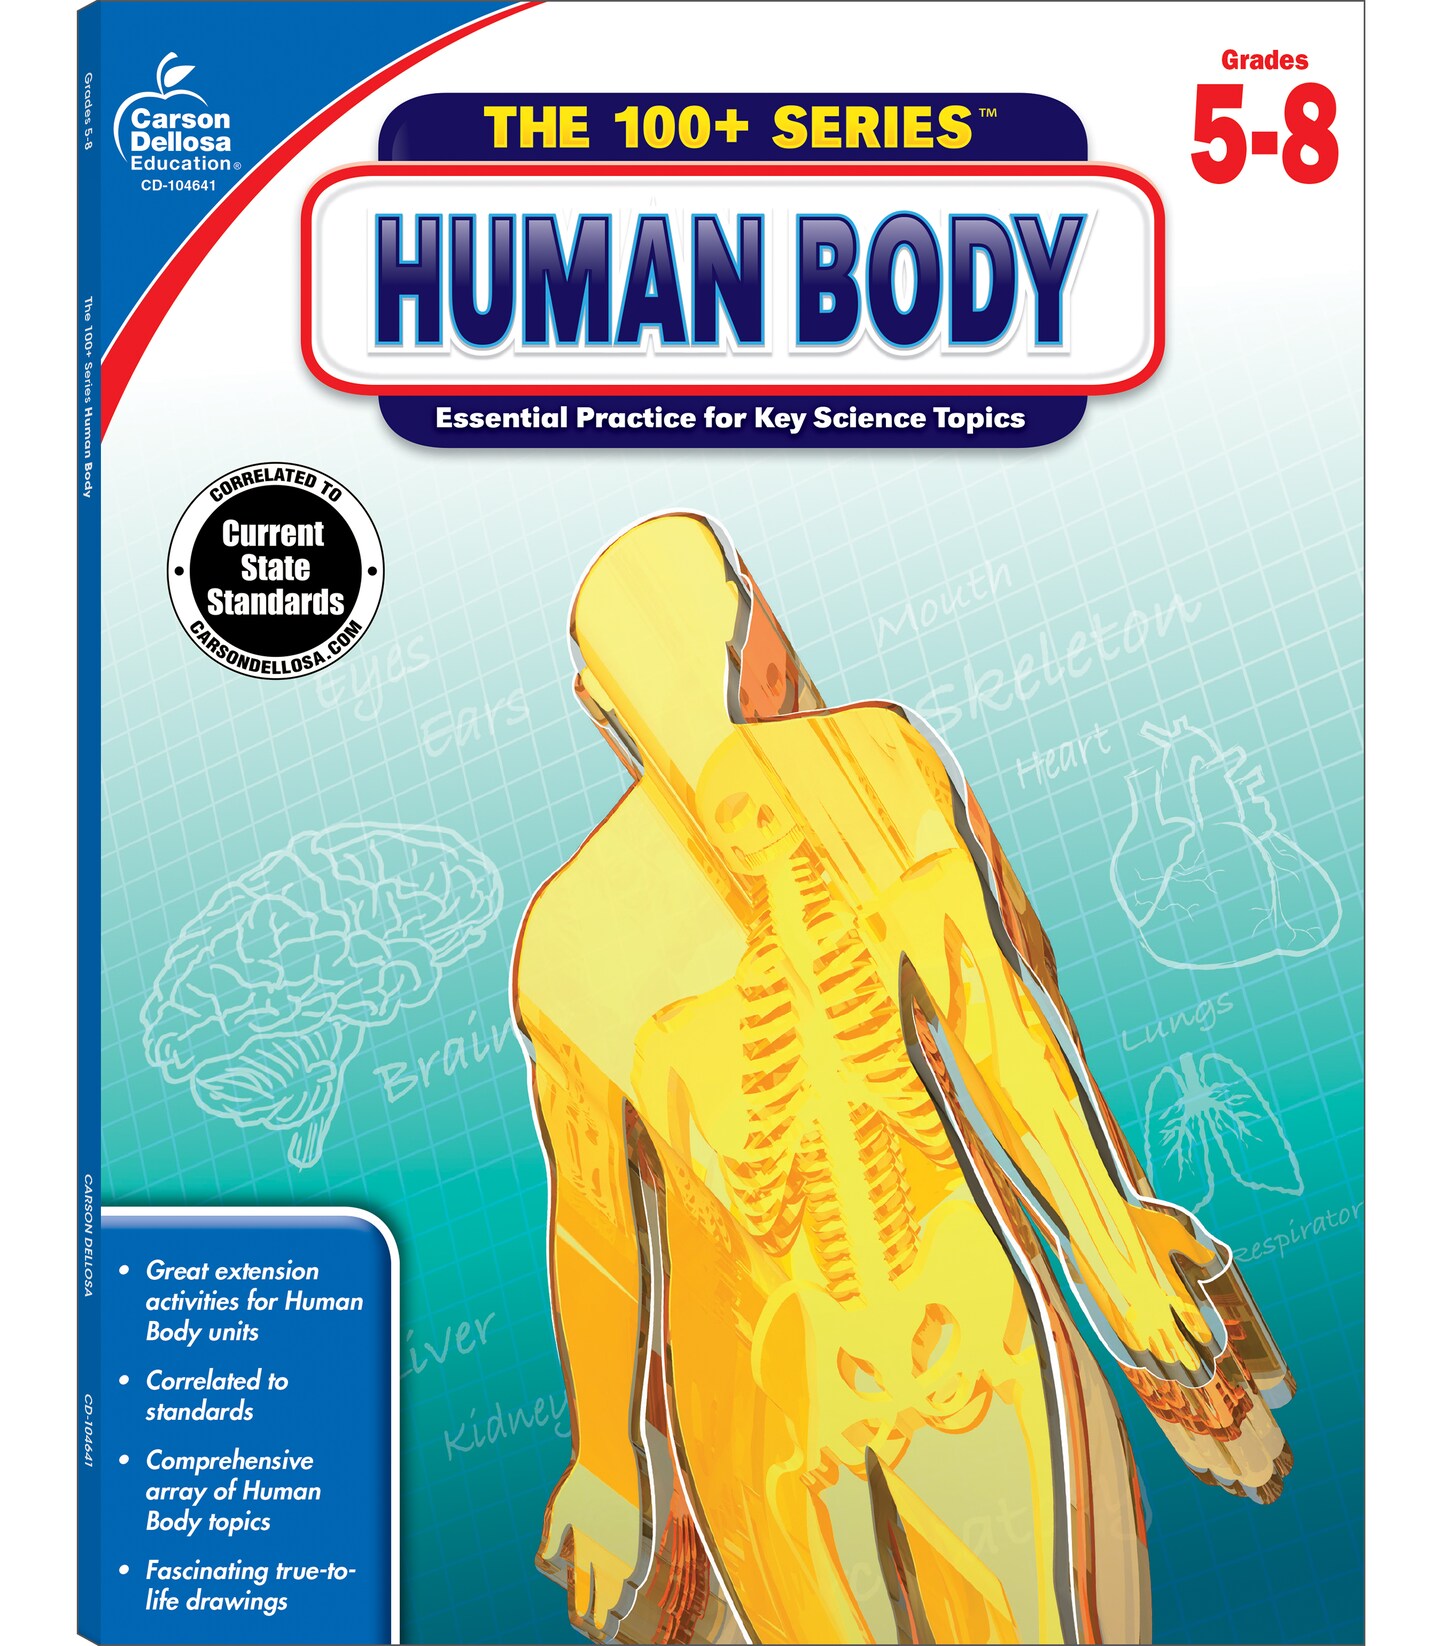 Carson Dellosa The 100+ Series: Human Body Workbook for Kids, Human Anatomy Book With Activities for Middle School Science Classroom or Homeschool Curriculum, Grades 5-8